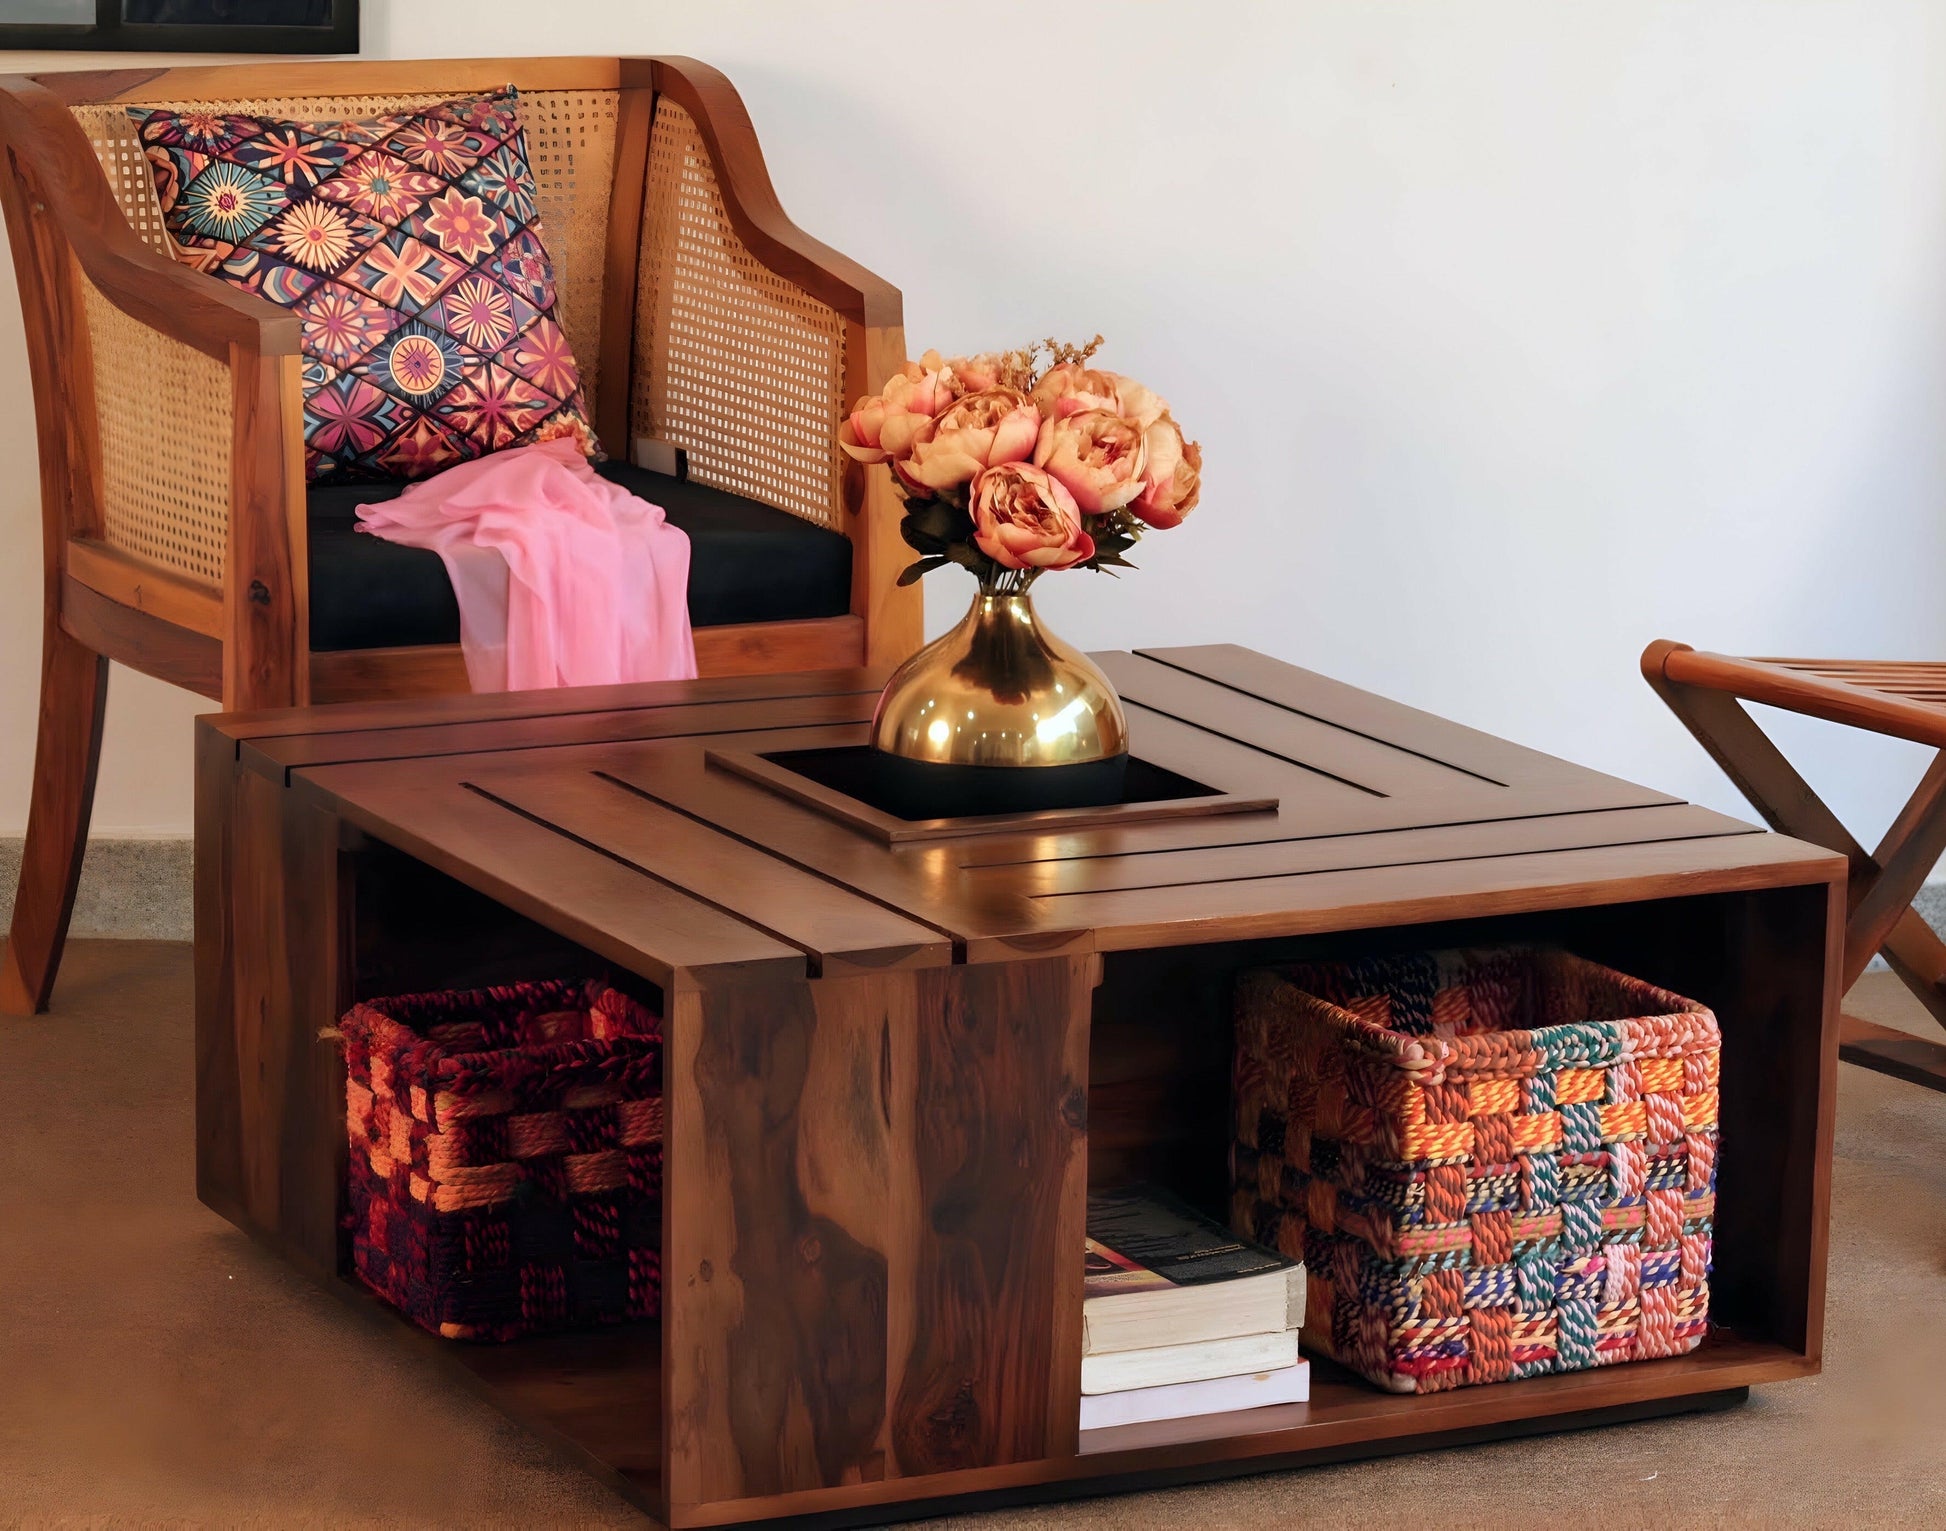 Transform your living space with our exquisite designer center tables crafted from sheesham wood,  with ample storage solutions for all your essentials. Shop the best Coffee tables in Bangalore now!